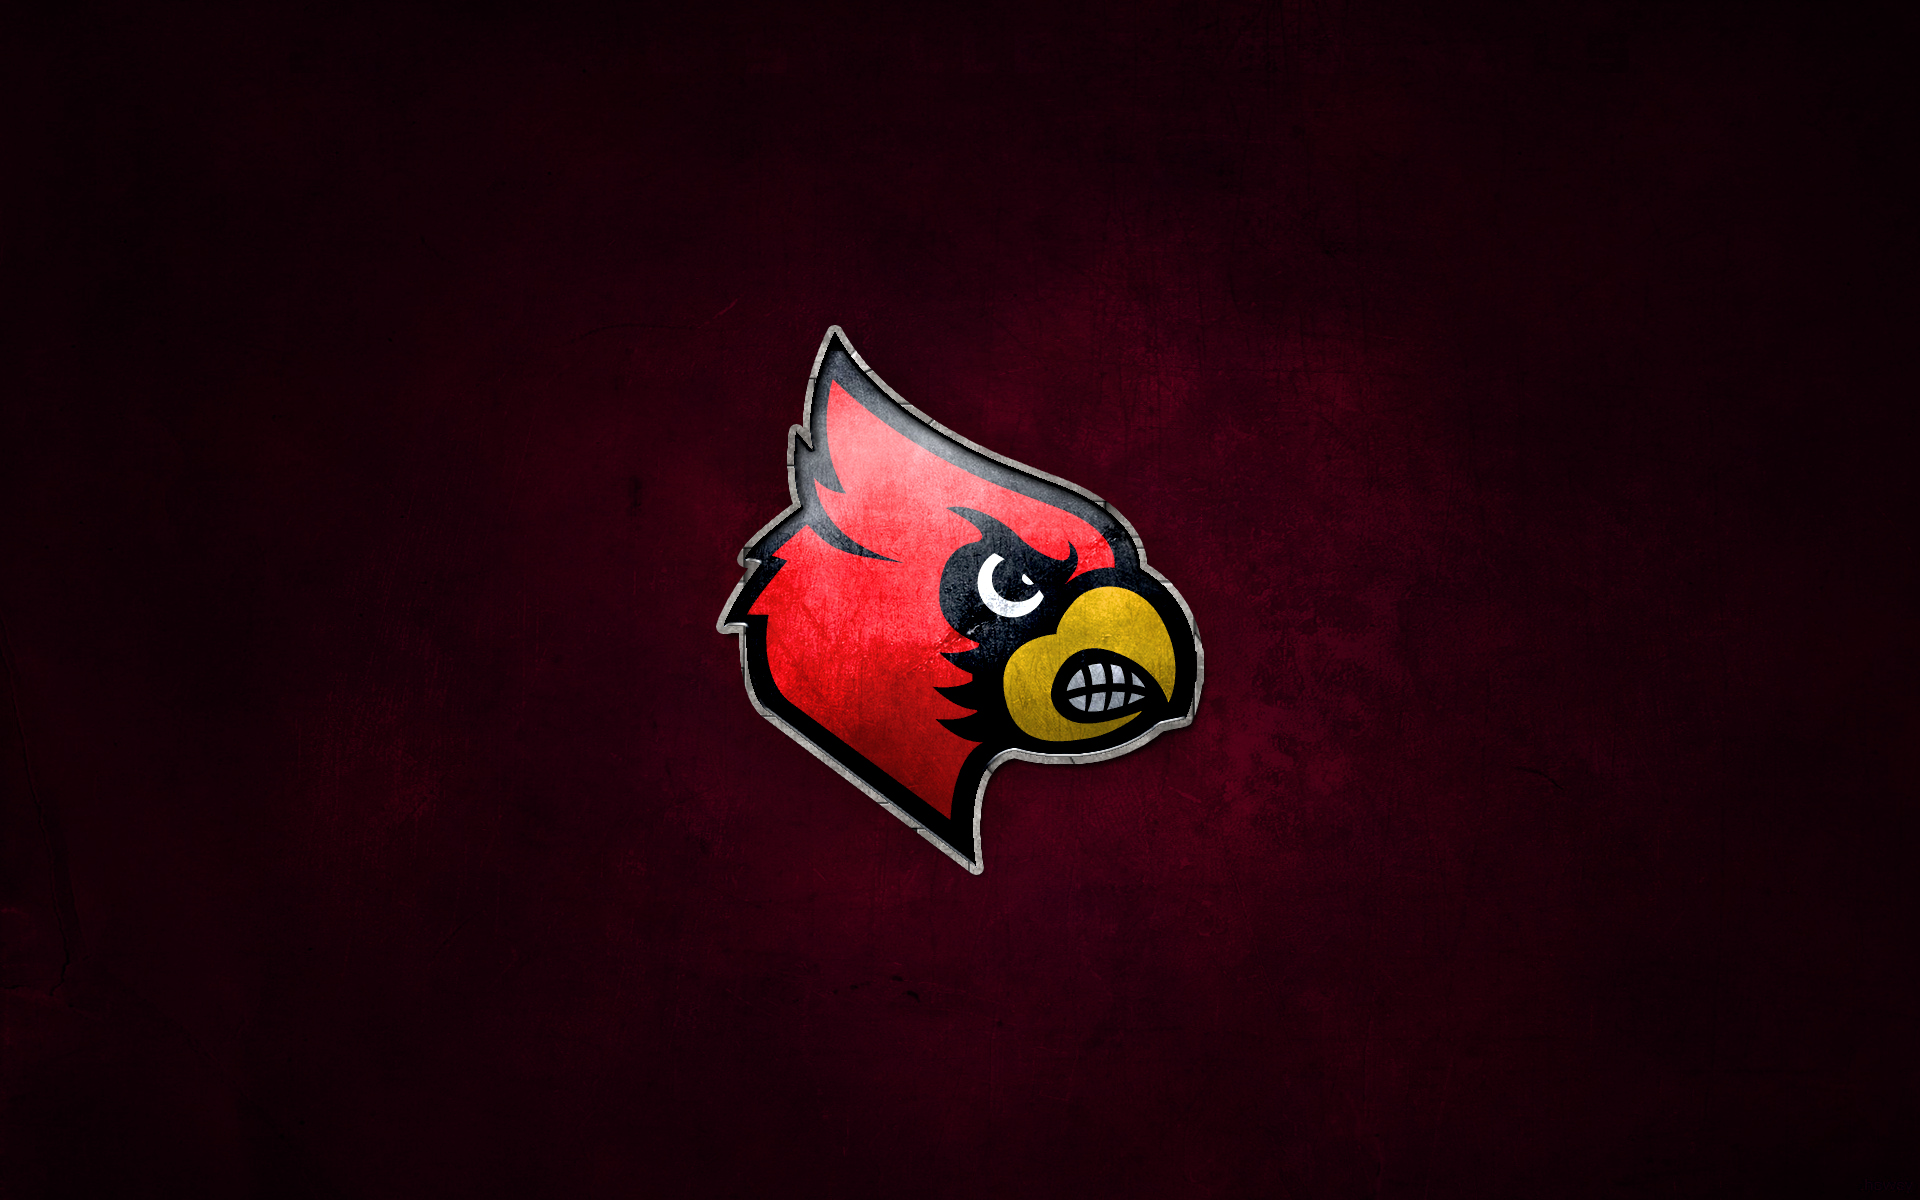 Covered In Red All Your UofL Design Needs